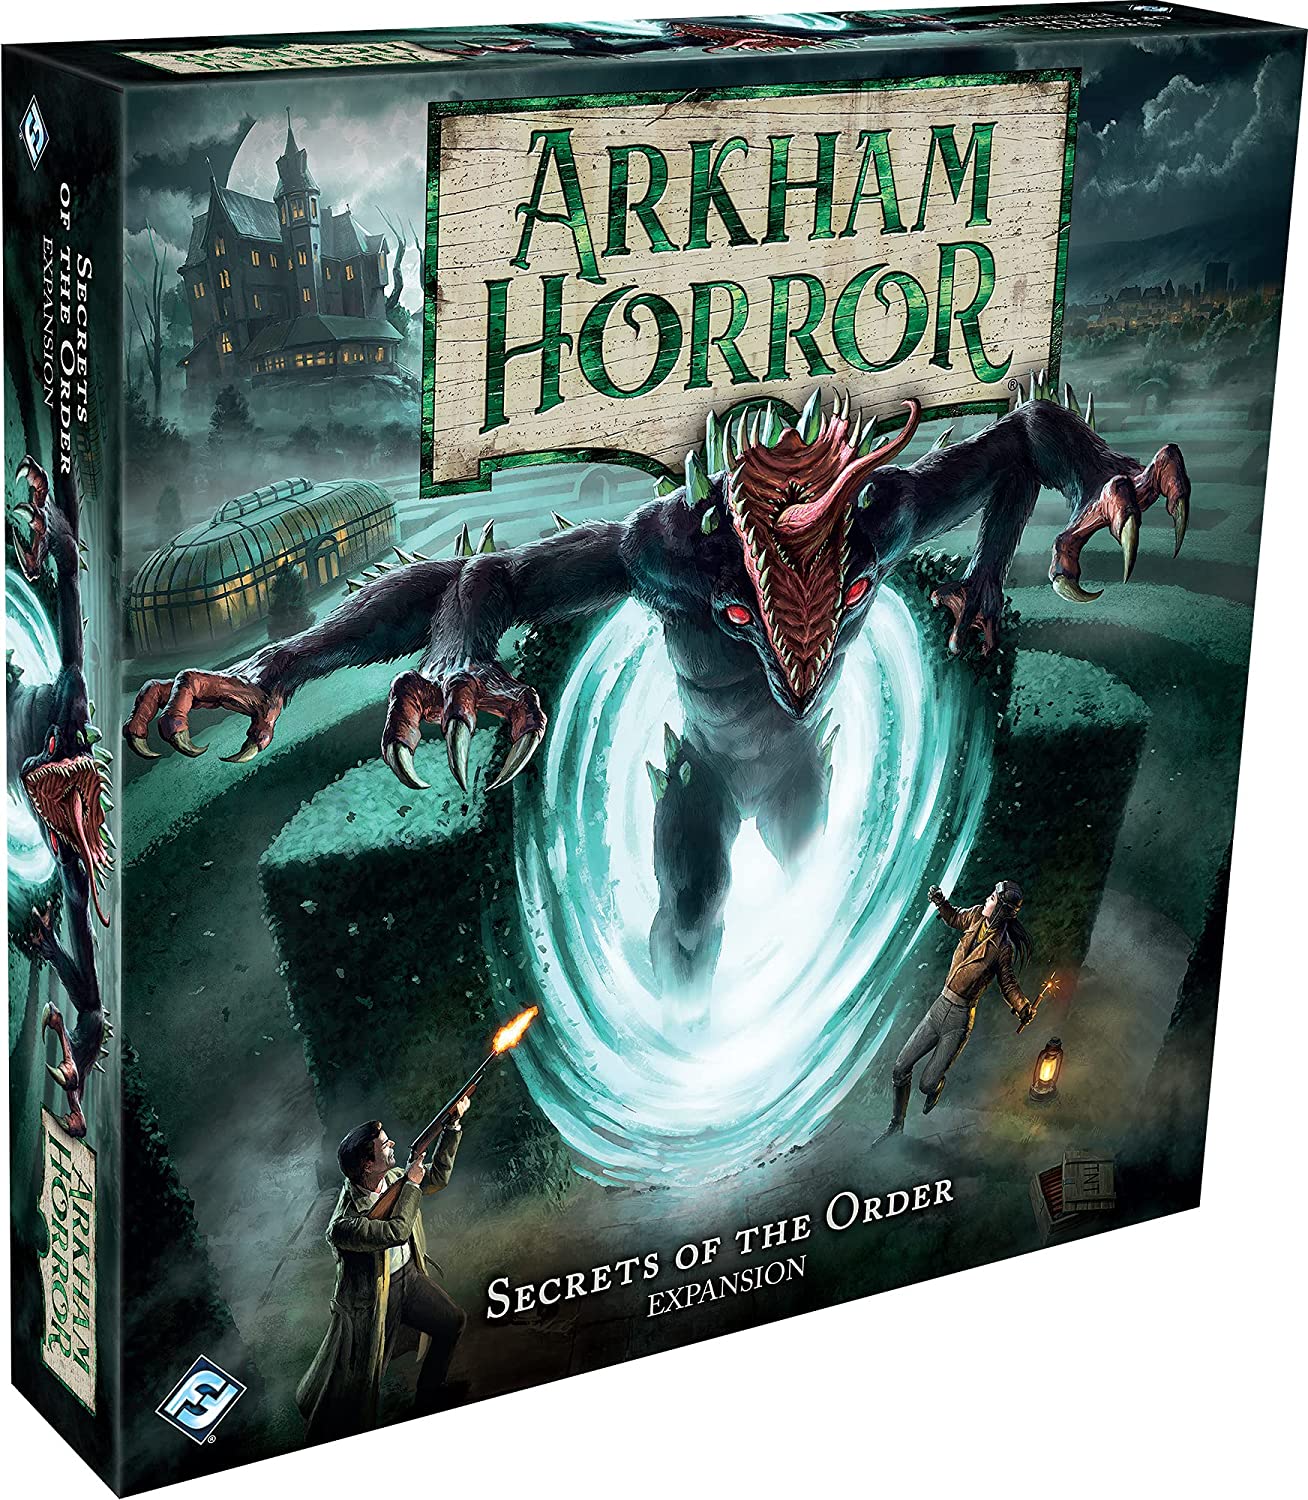 Arkham Horror 3rd Edition - Secrets of the Order Expansion